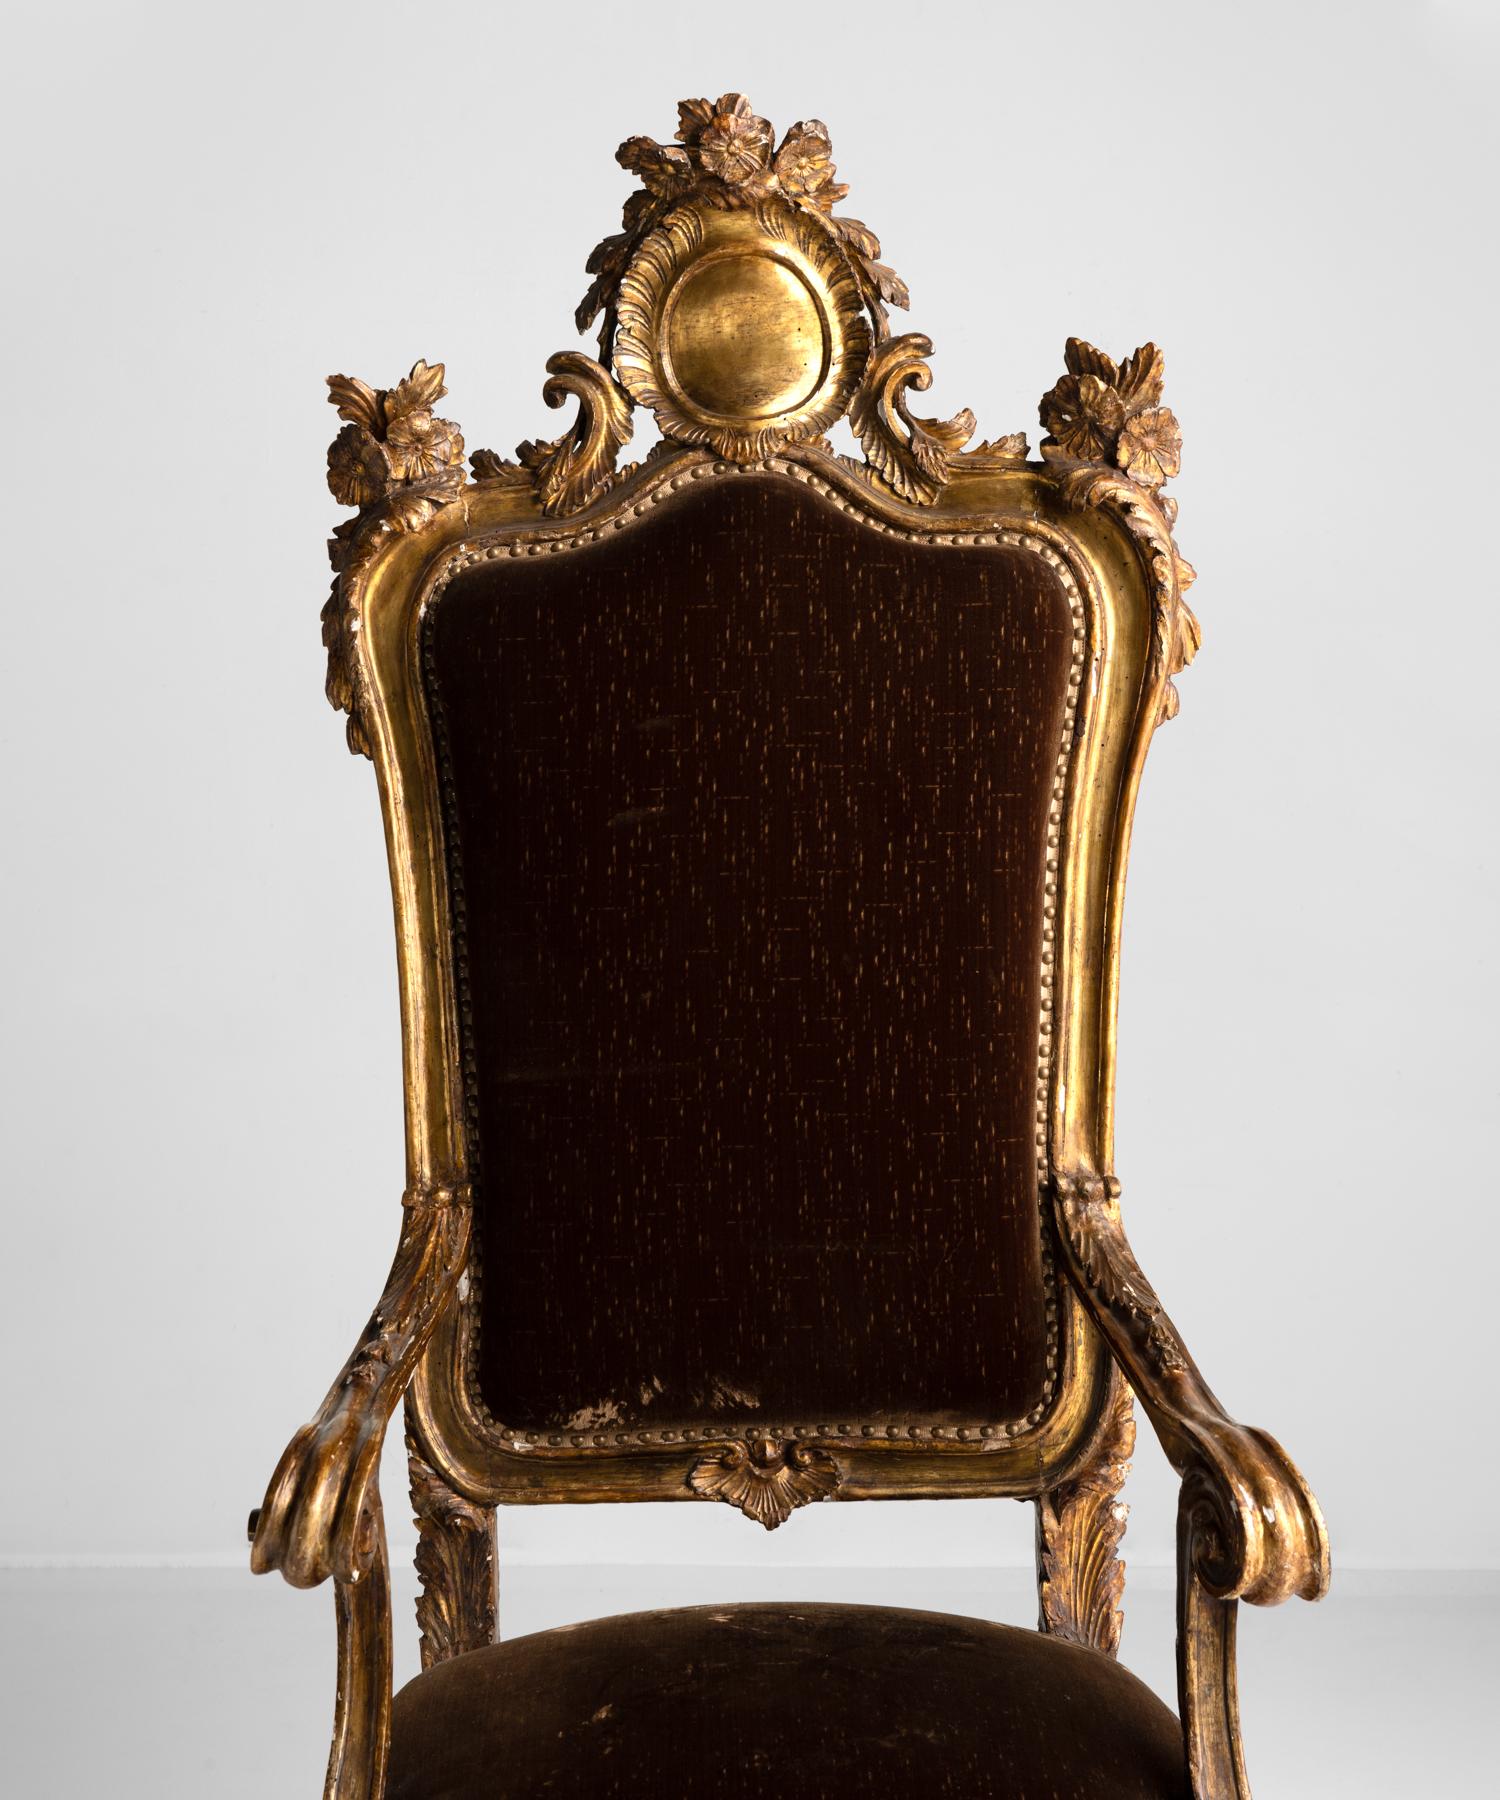 Gilded Throne Chair, Italy, 18th Century

Large scale with original, distressed velvet, gilded paint and amazing detailing throughout.